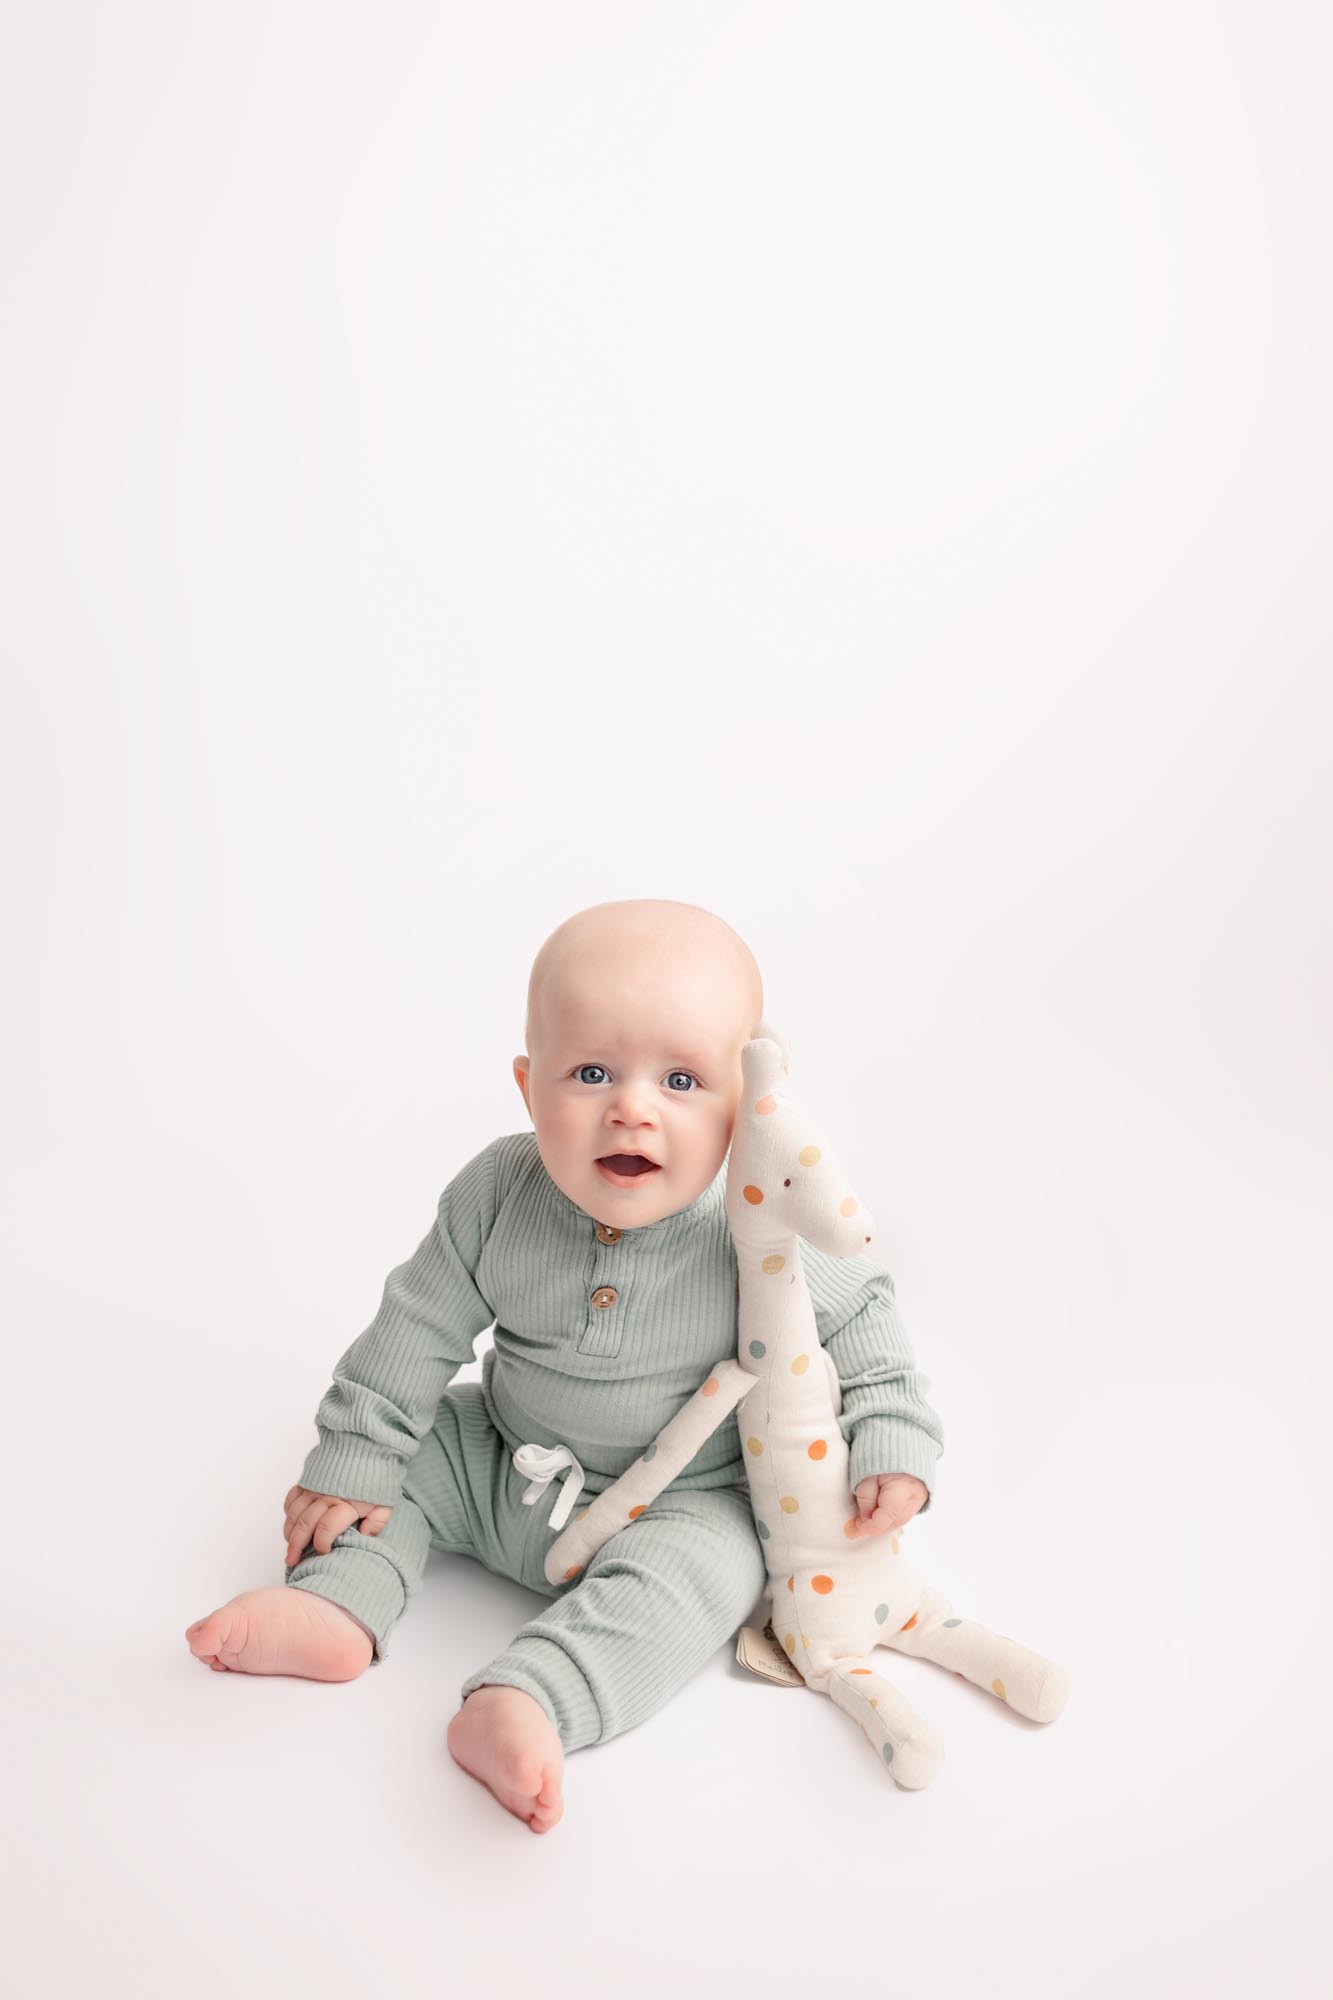 Smiling baby boy in mint green outfit sitting with a giraffe during Milestone Pictures at San Diego Professional Photography Studio